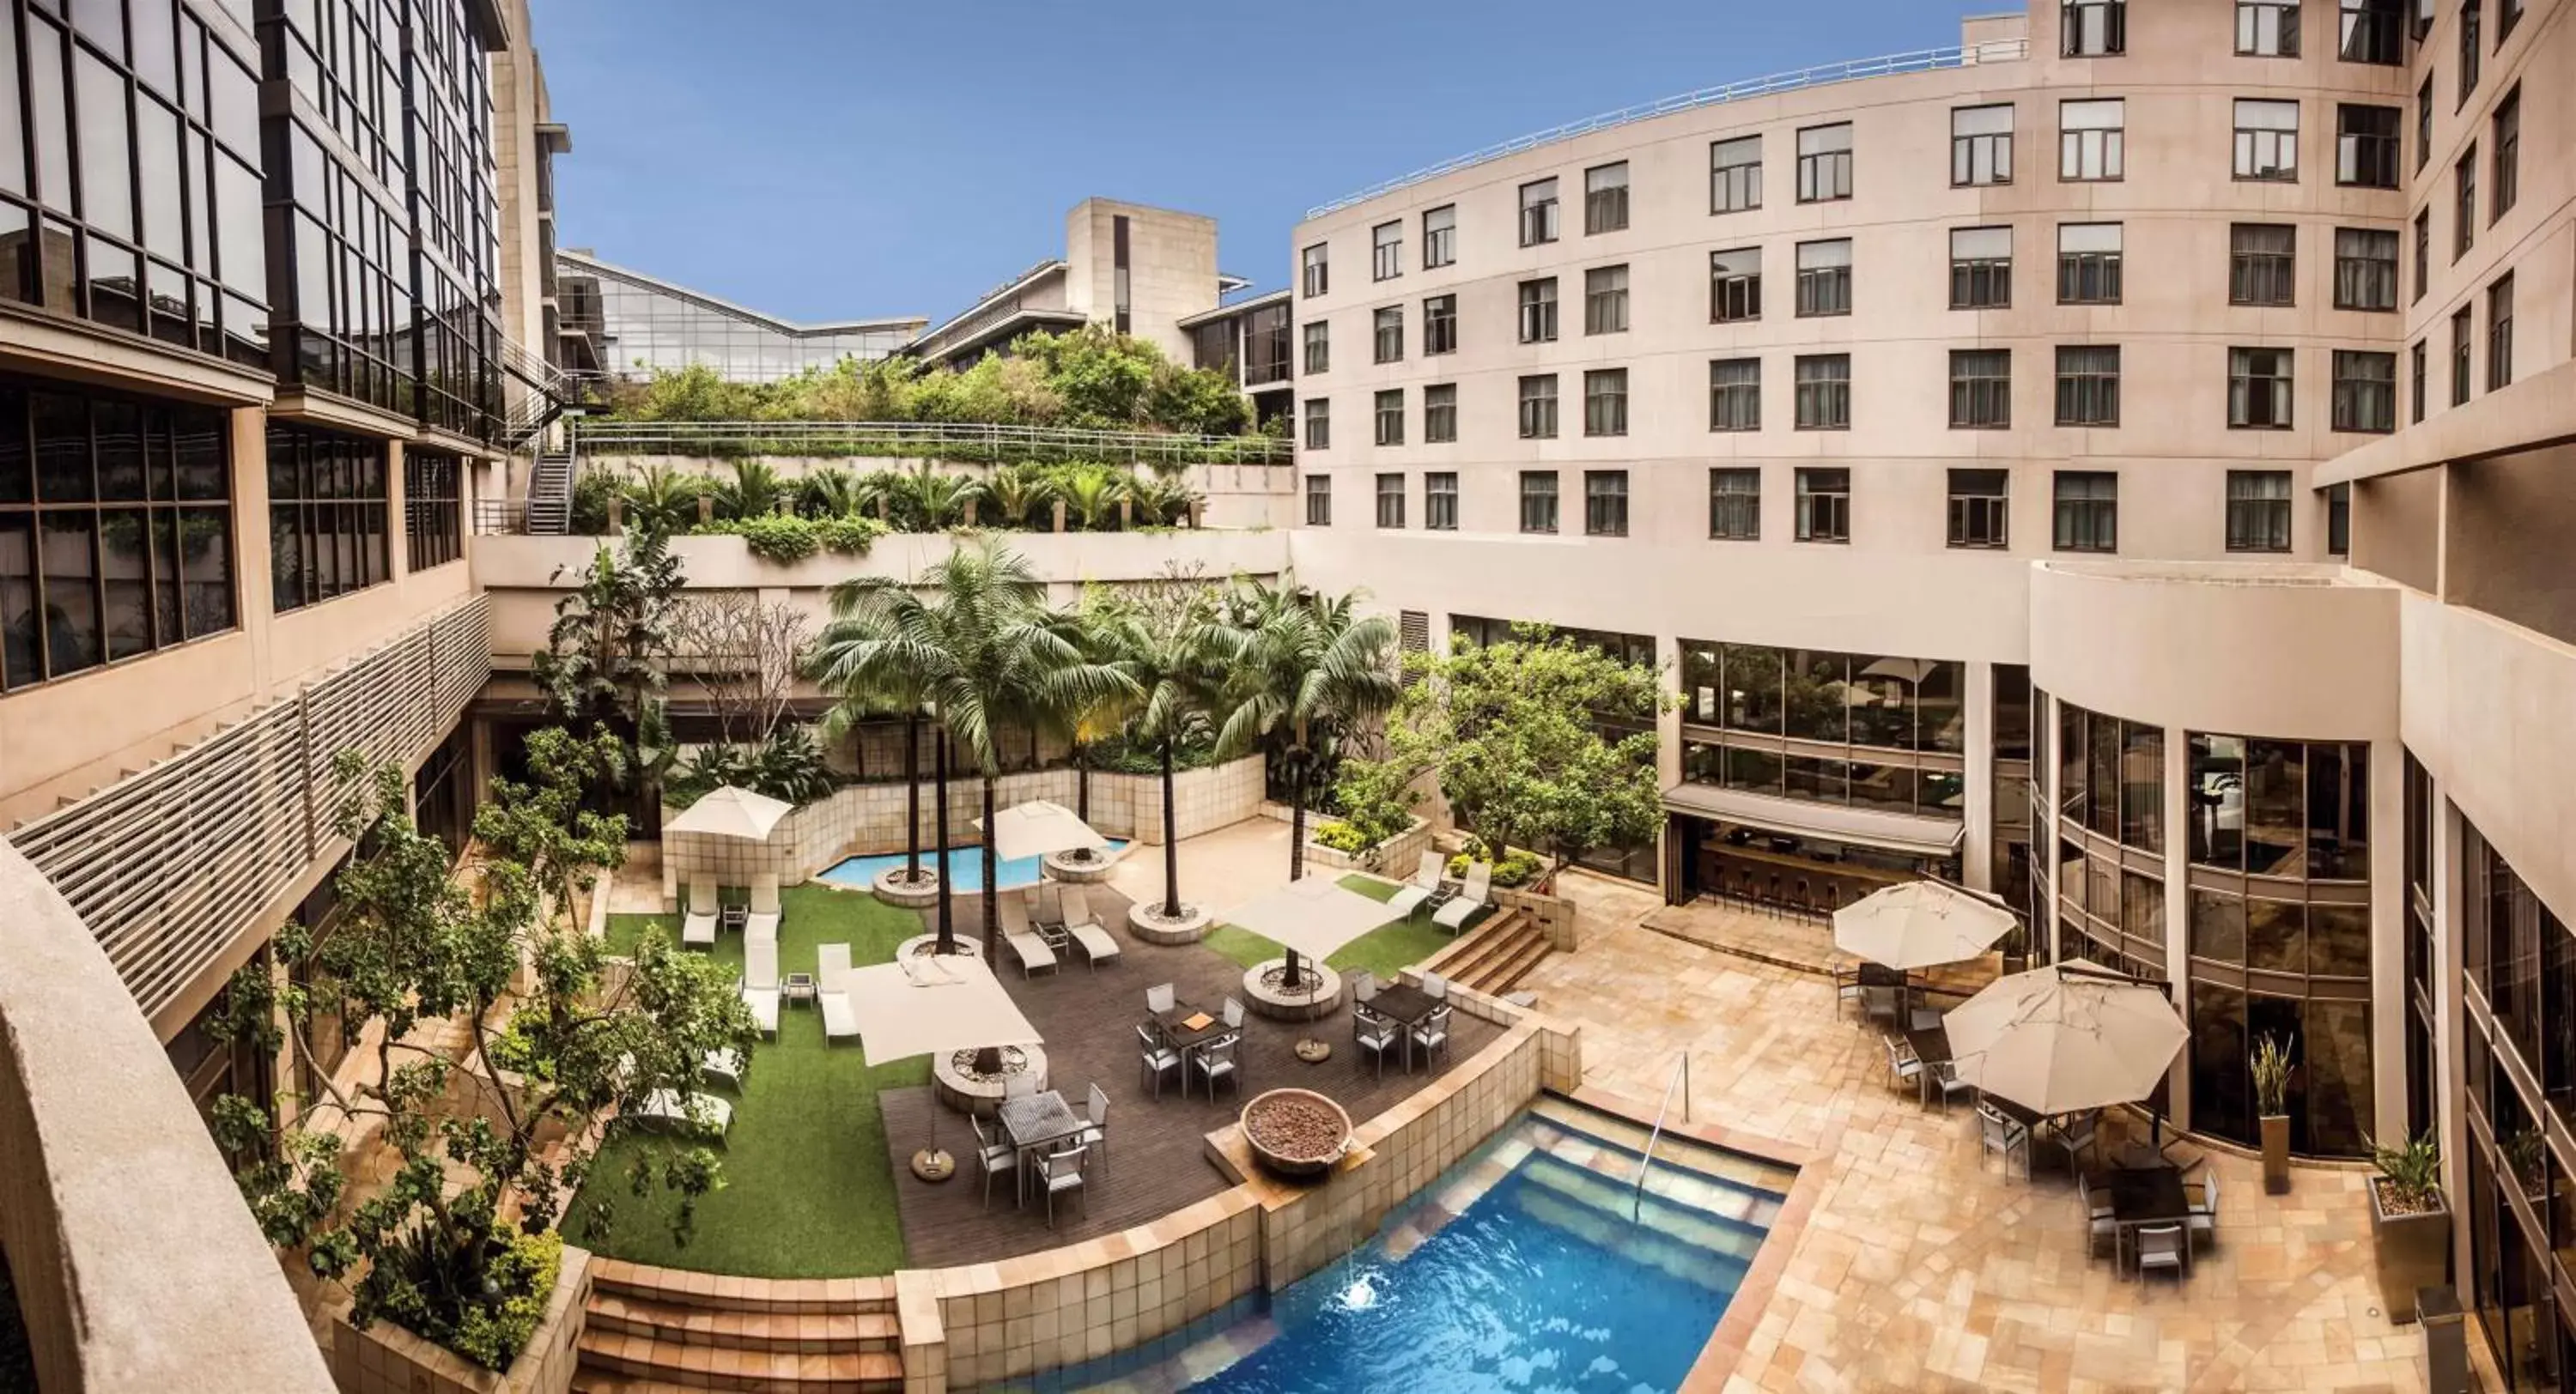 Property building, Pool View in Garden Court Umhlanga